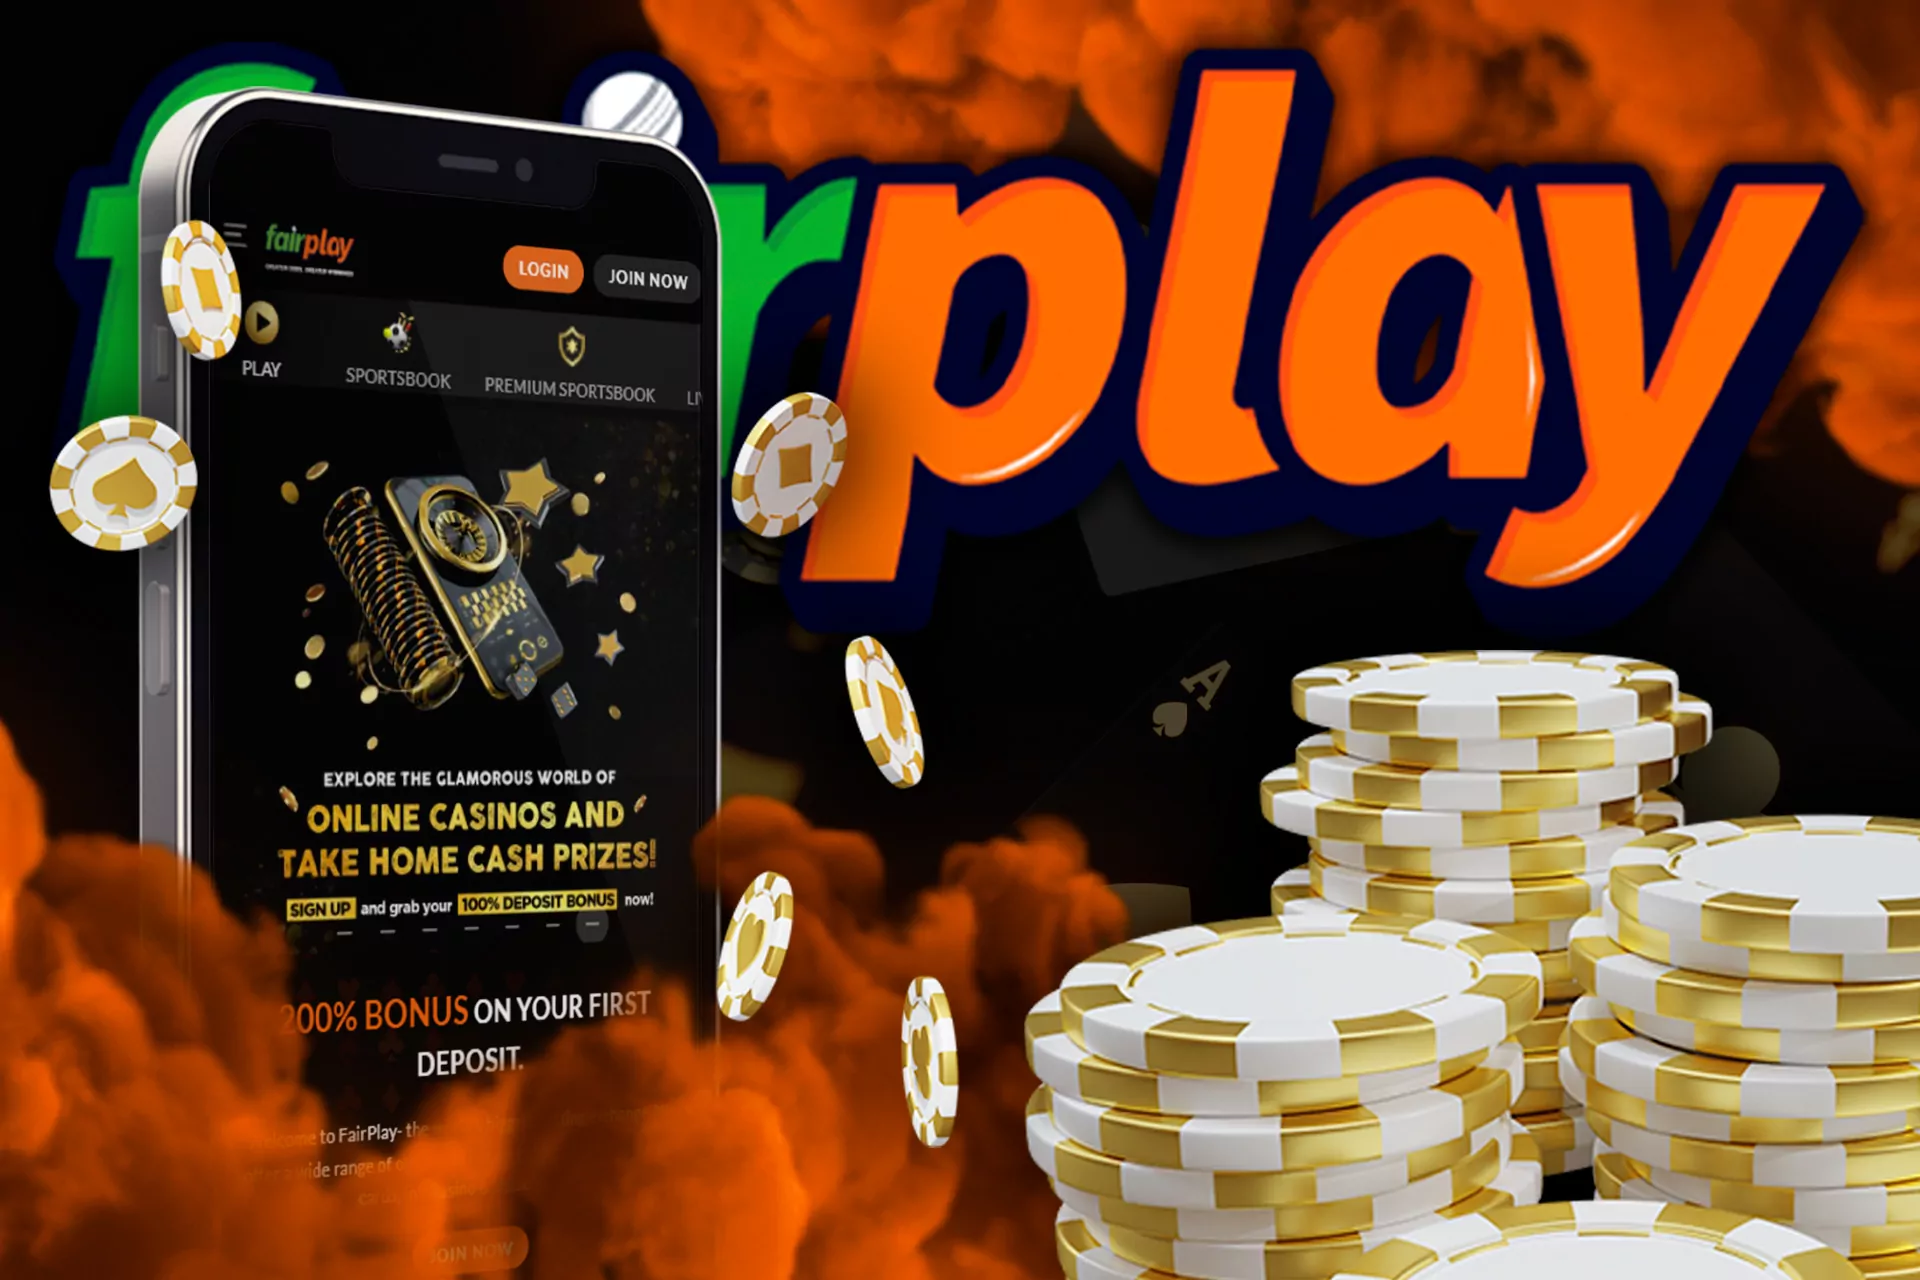 Install the Fairplay app to play casino games on your mobile device.